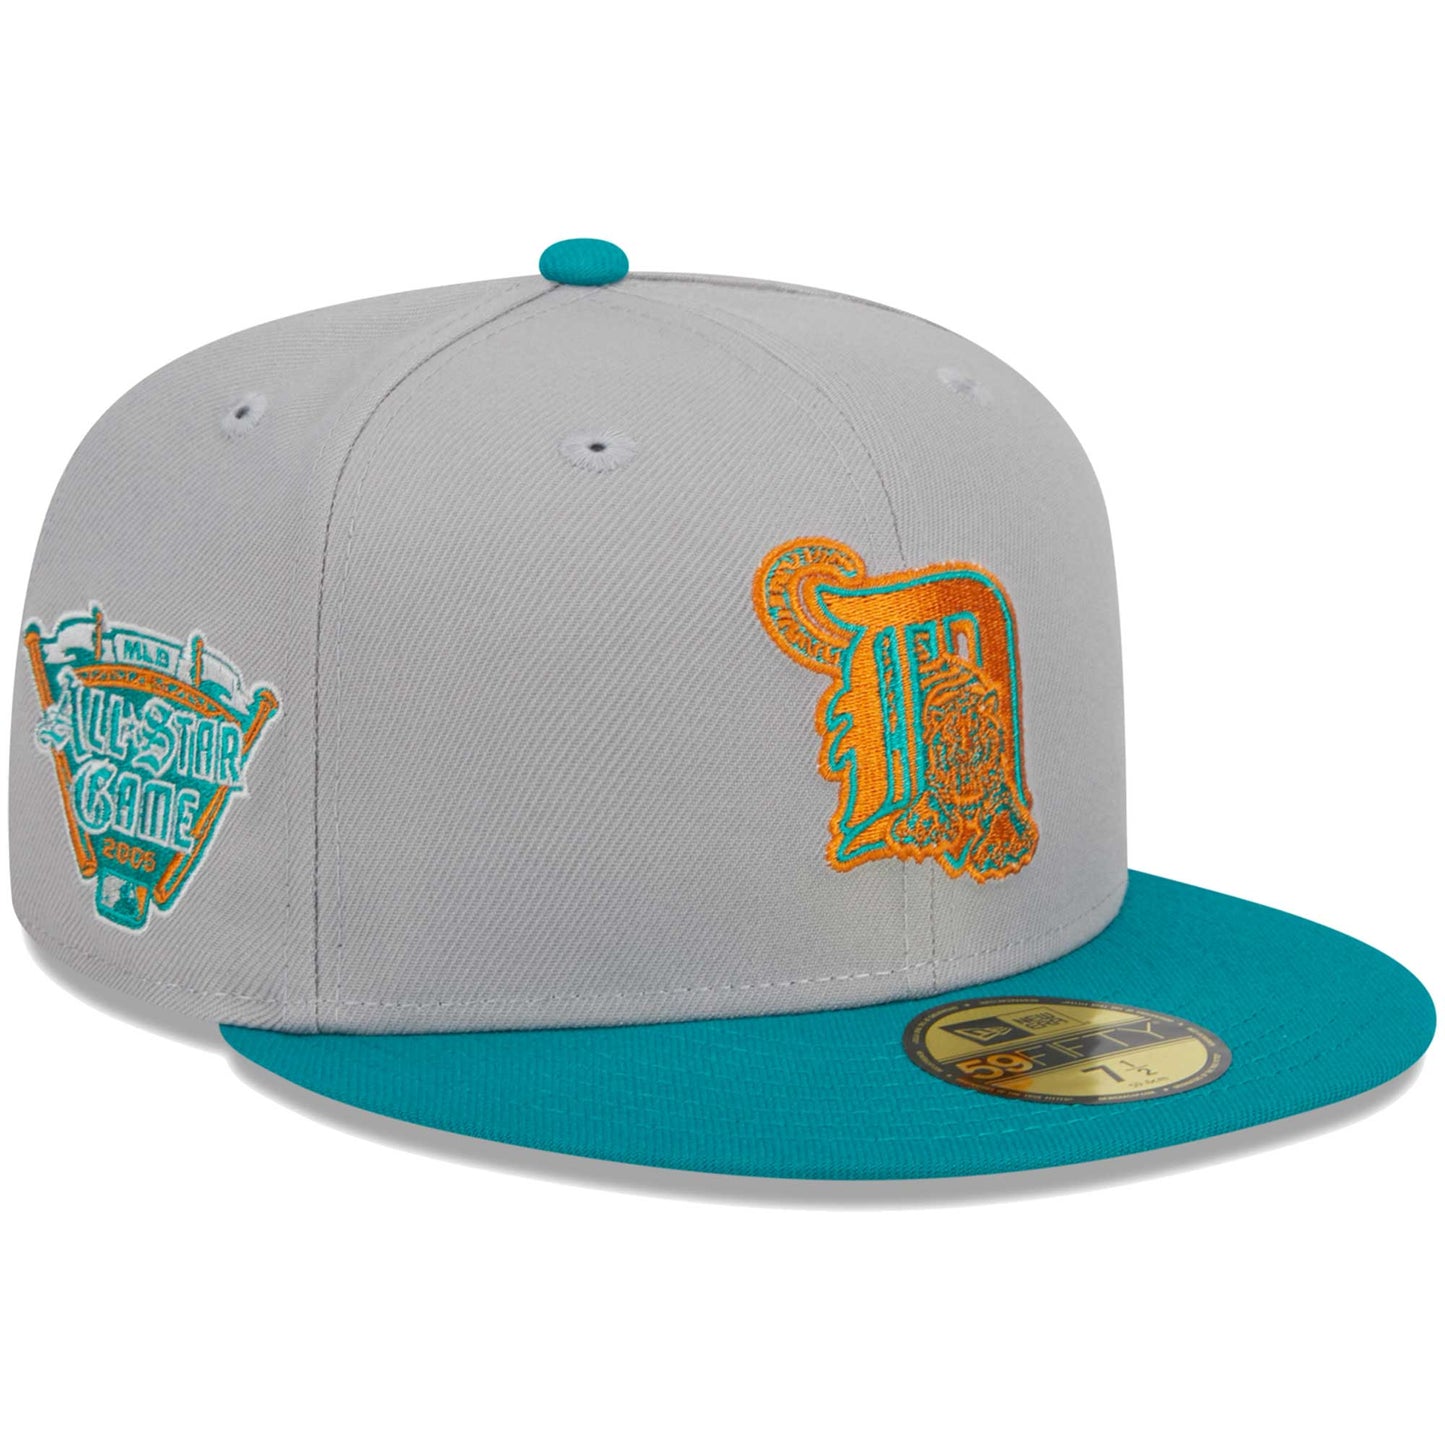 Detroit Tigers New Era 59FIFTY Fitted Hat - Gray/Teal